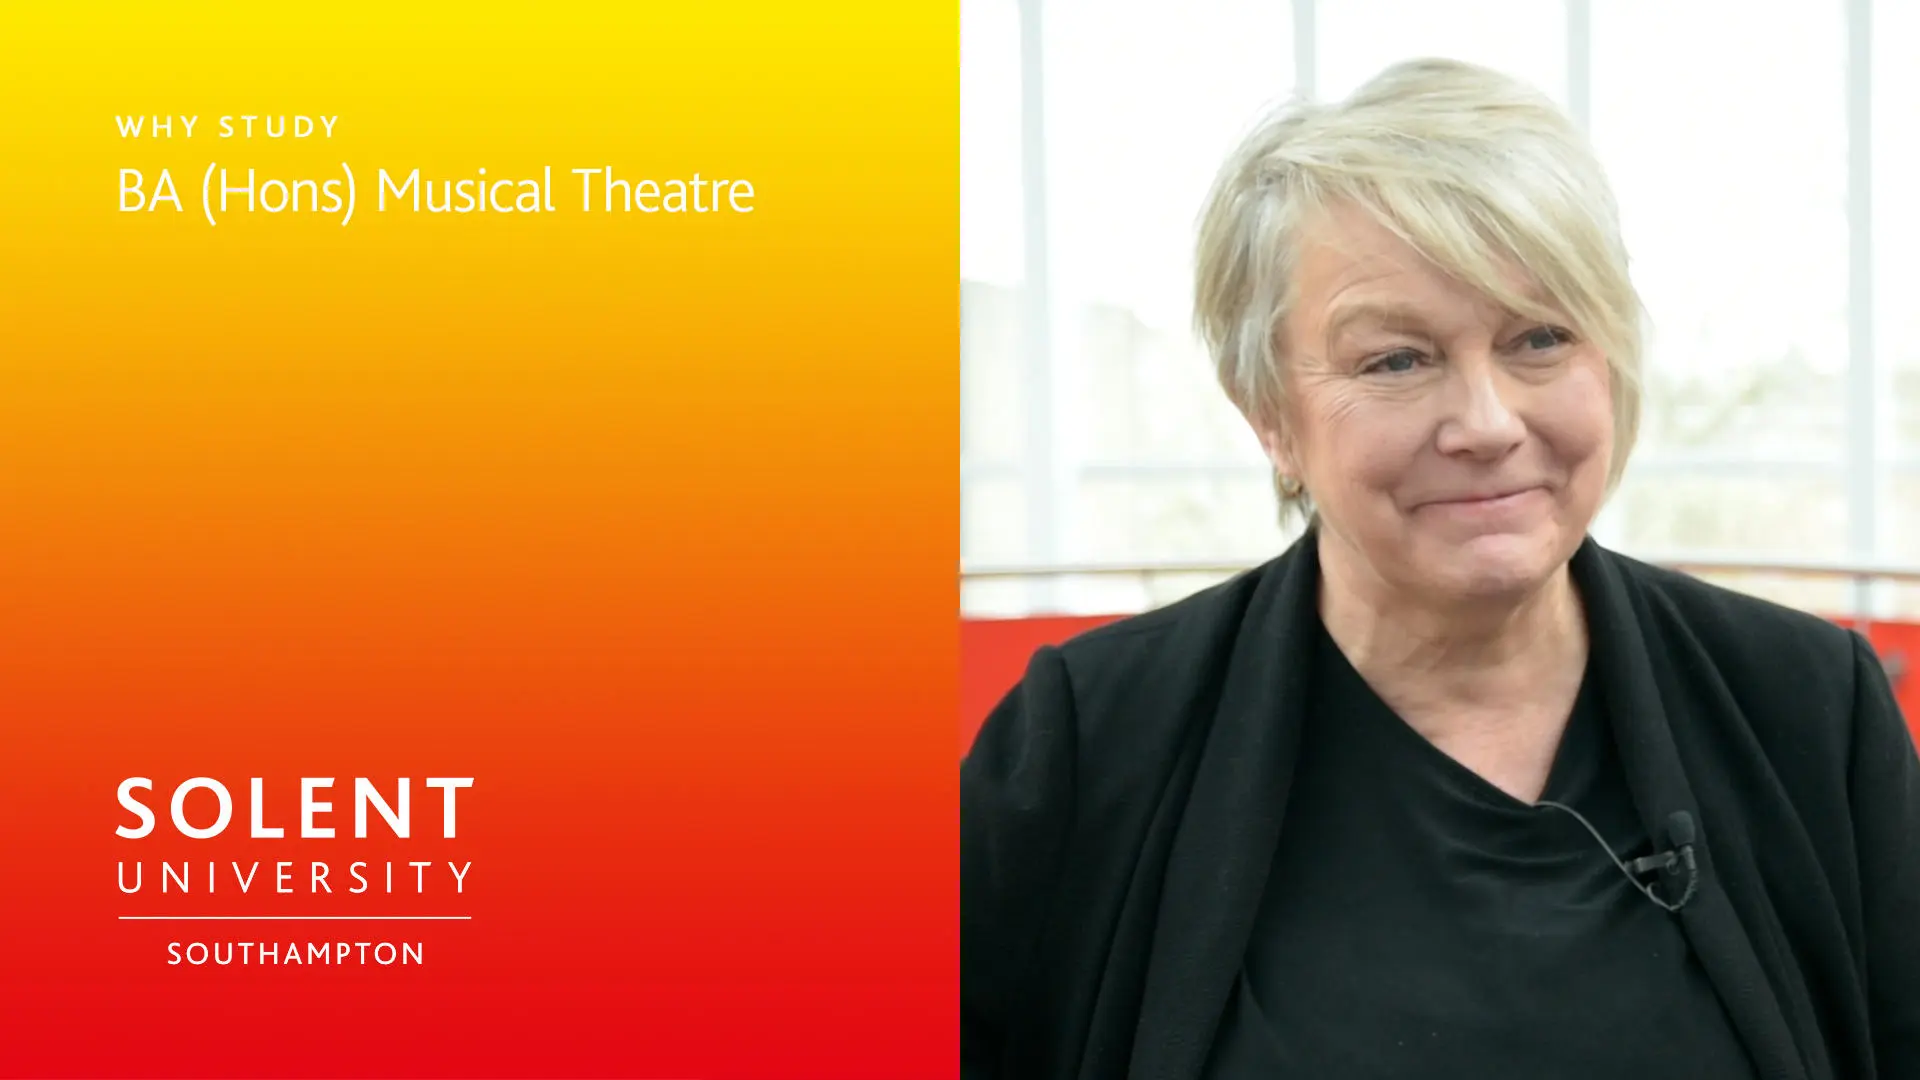 On the left of the screen is a yellow to orange gradient (portrait) with white copy over the top which reads 'Why study BA (Hons) Musical Theatre' and the Solent University, Southampton logo bottom left. To the right is a photo of lecturer Maggie Tarver, who is looking off camera and smiling.